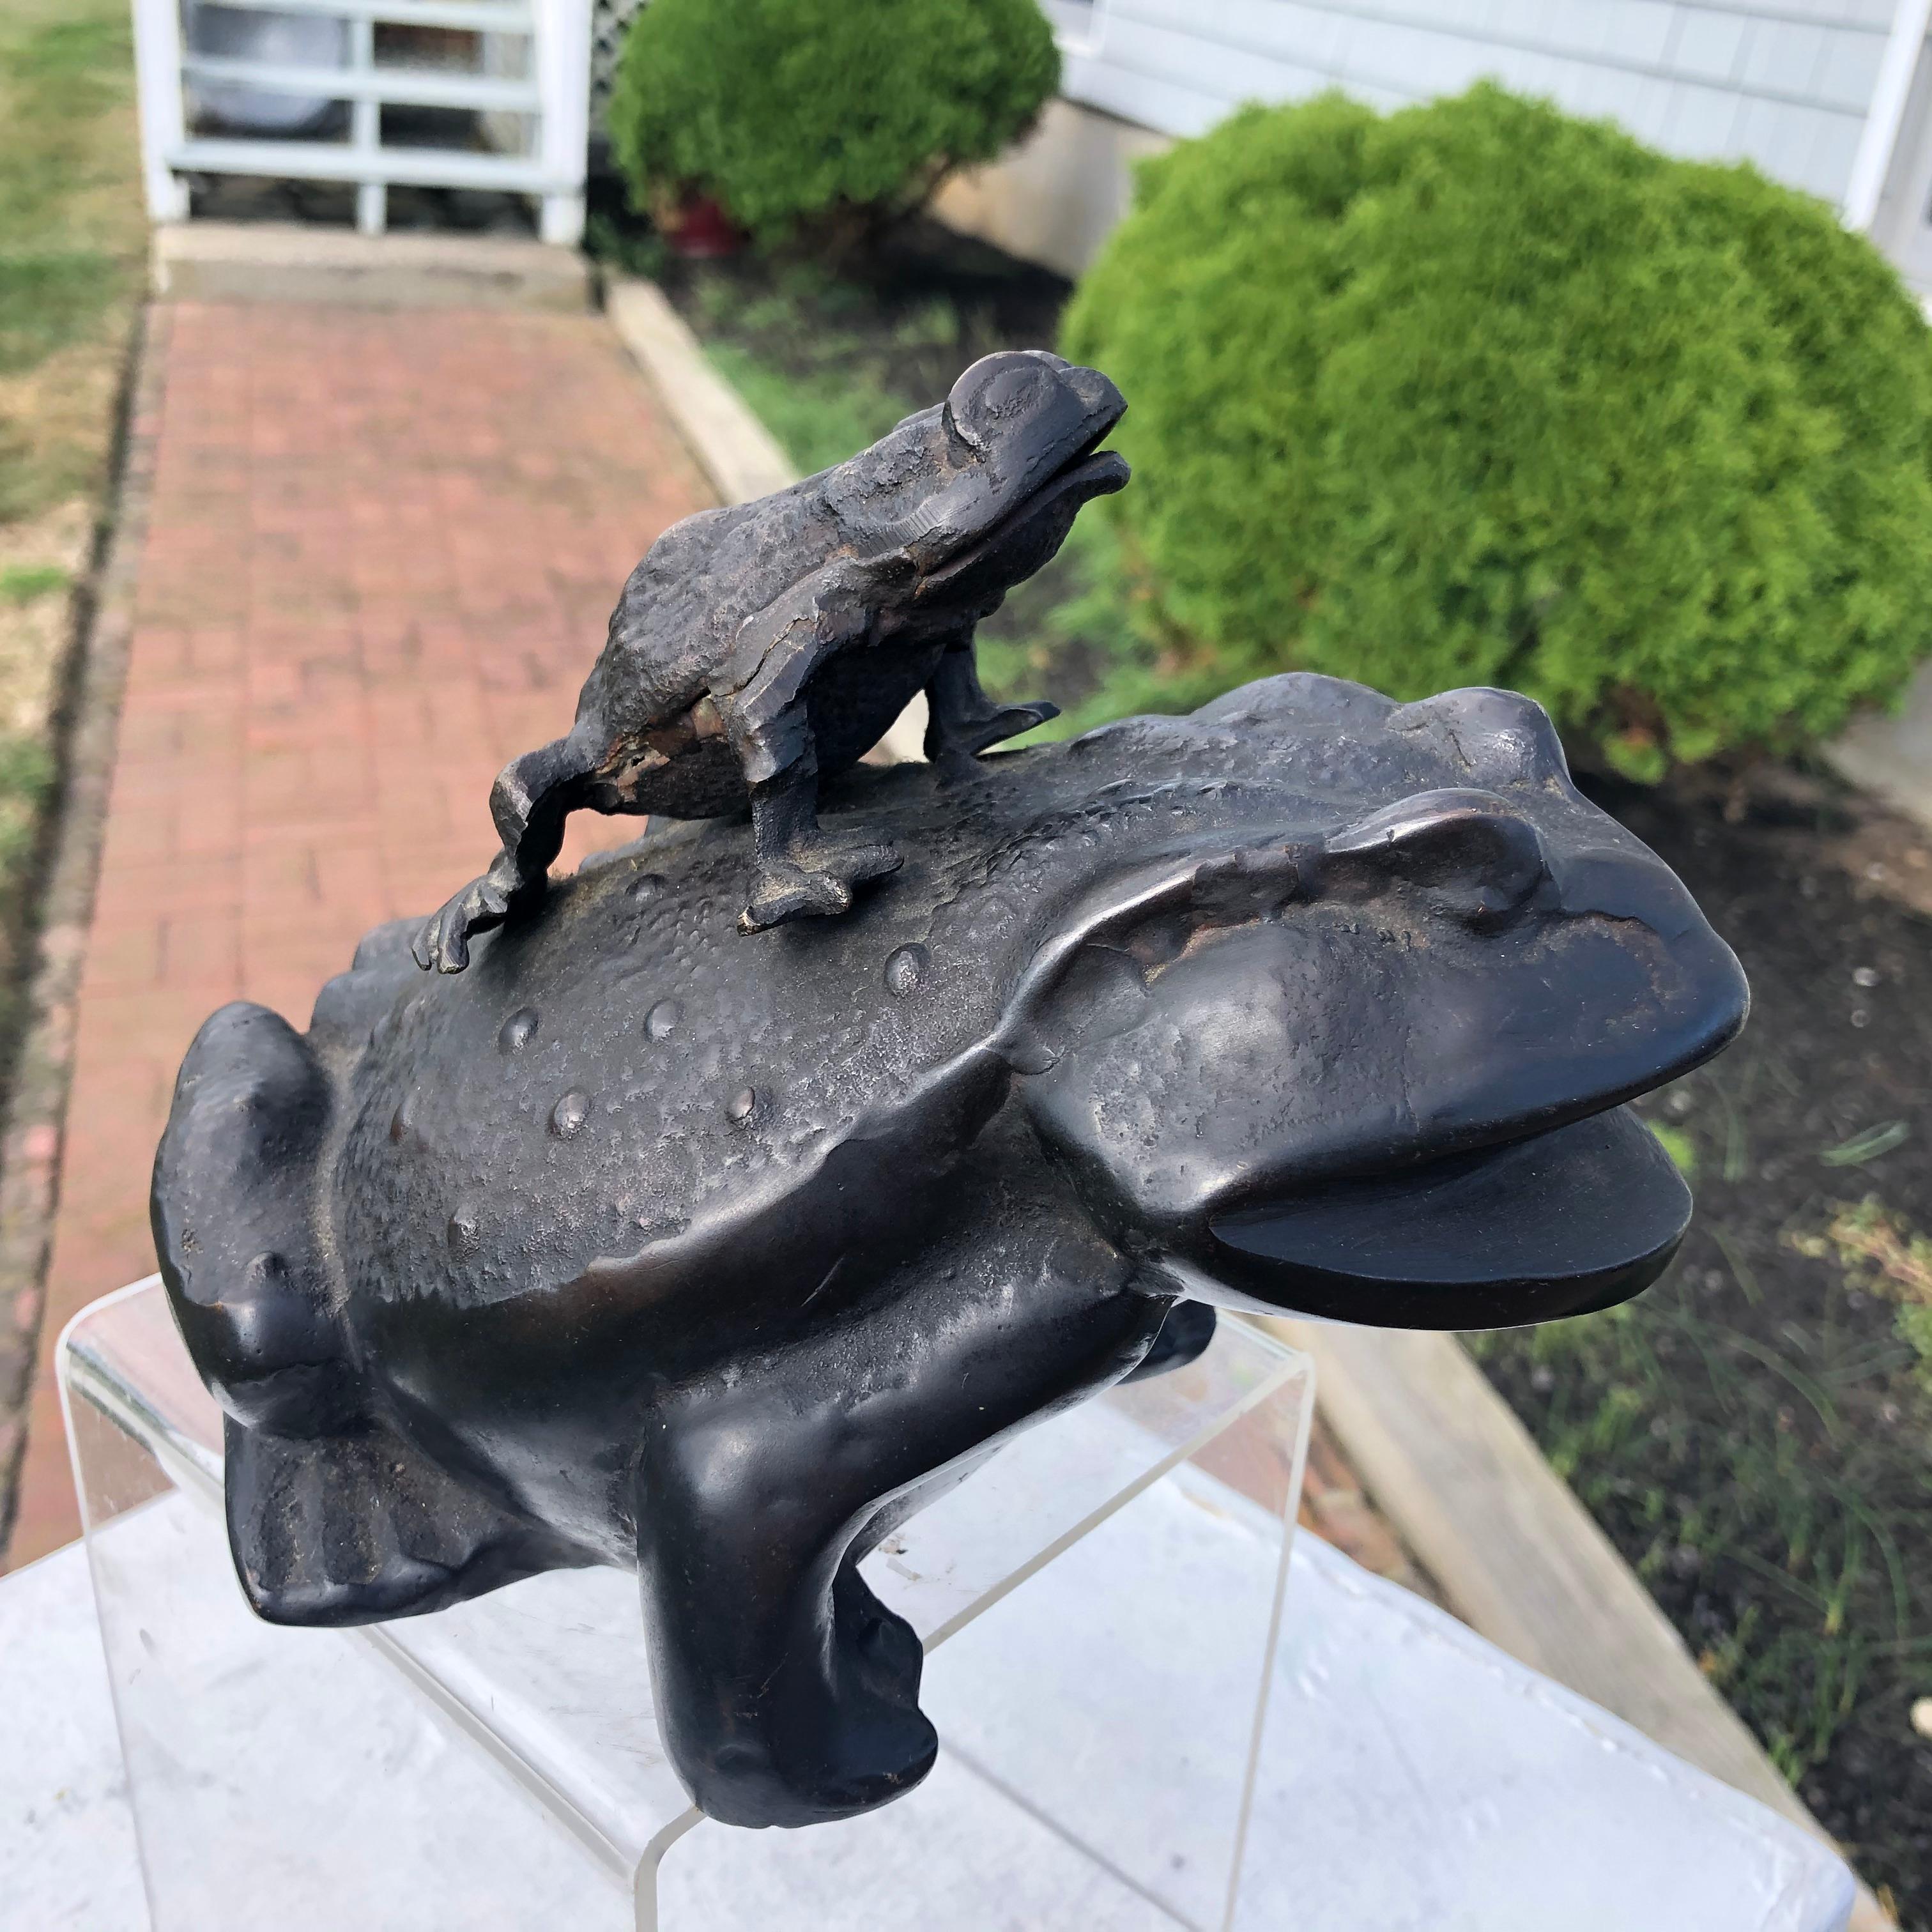 From our recent Japanese acquisitions

Japan, a hard to find hand cast cute bronze frog family -kaeru- sculpture dating to the Meiji period, 19th century.

Handsome youthful critter and bumps are cast on its piggy back and arms and with a